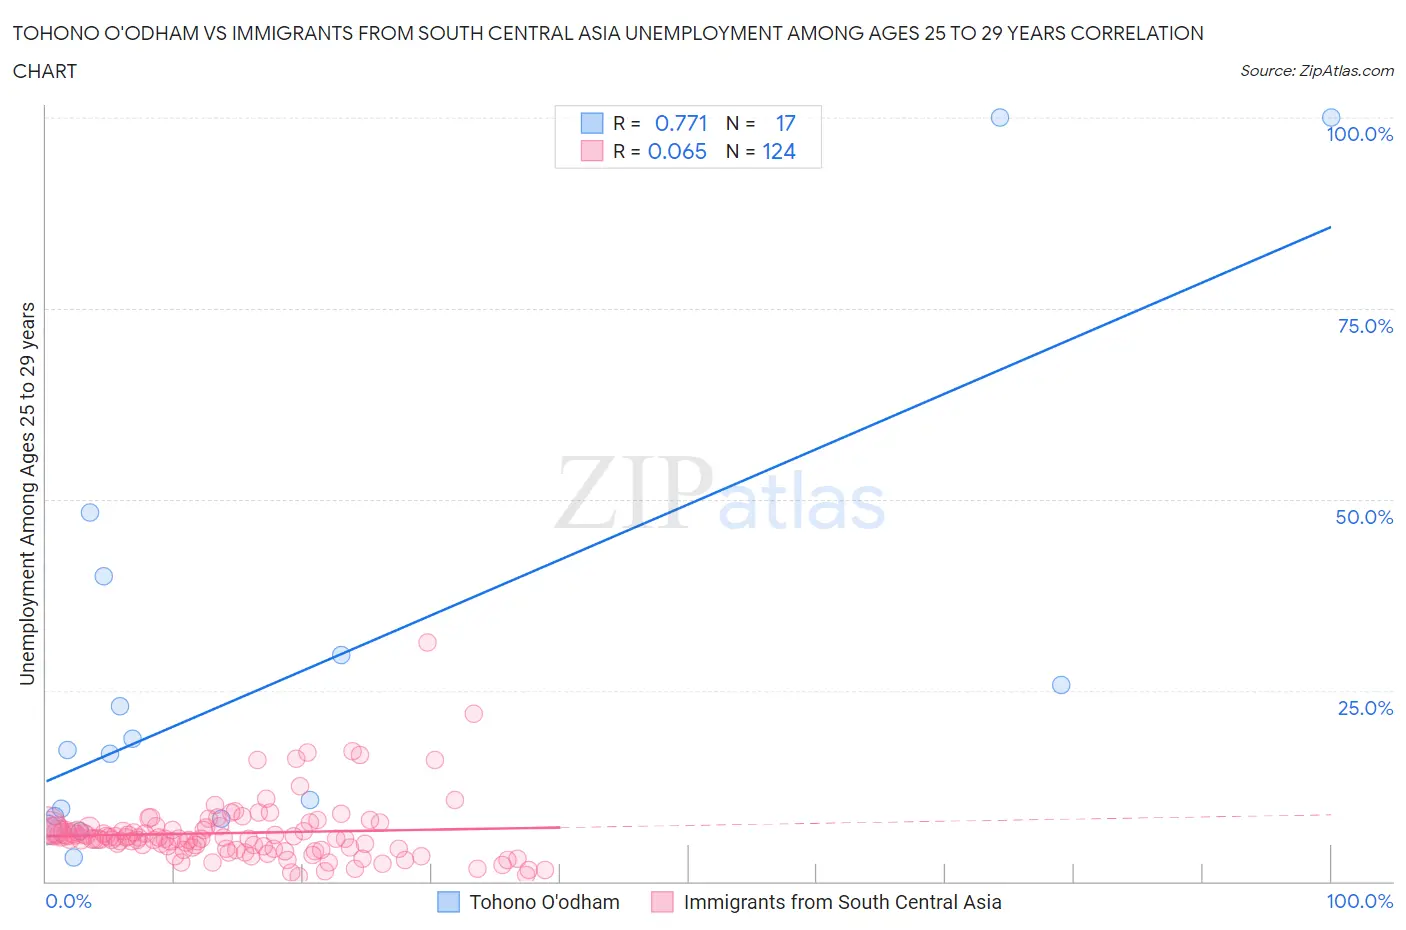 Tohono O'odham vs Immigrants from South Central Asia Unemployment Among Ages 25 to 29 years